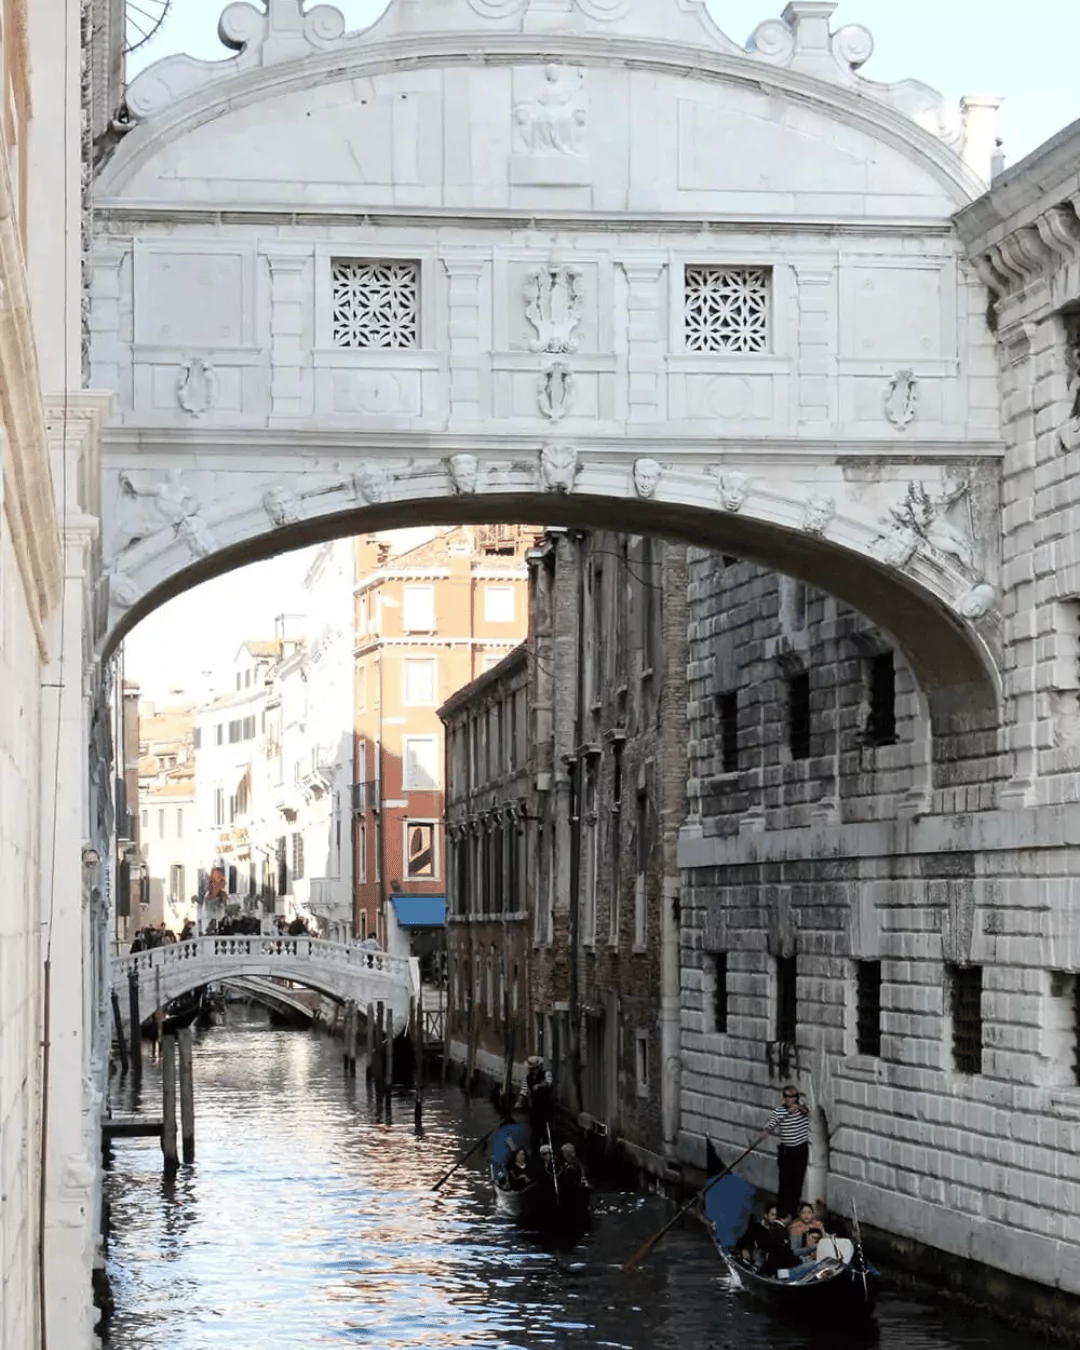 The Bridge of Sighs in Venice, Italy